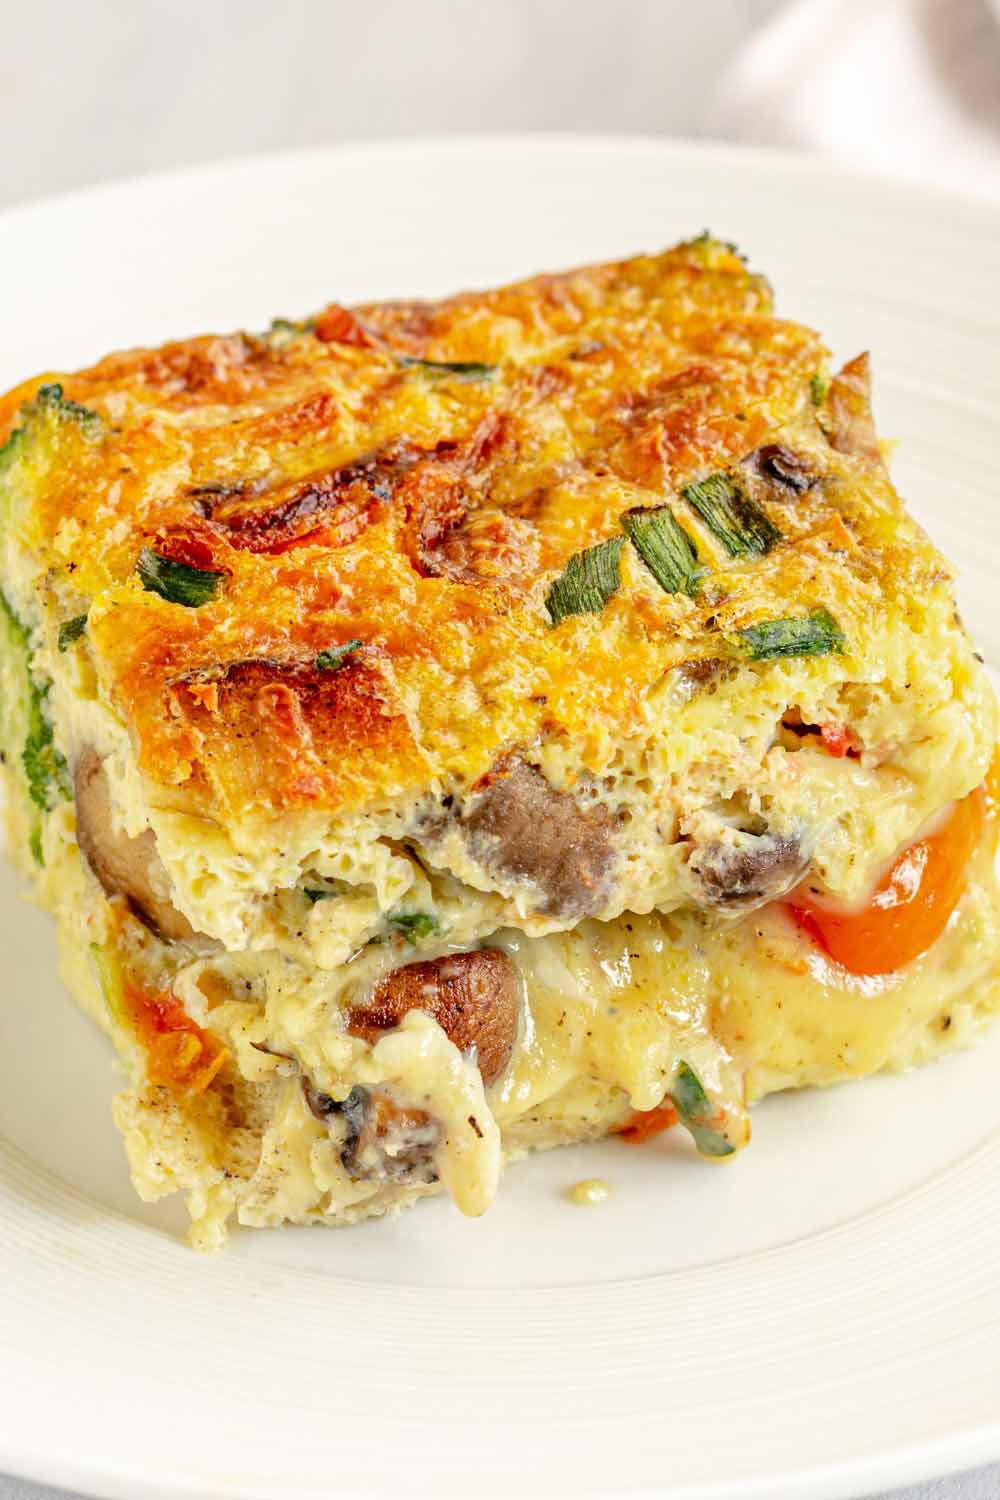 Can I Make This Breakfast Casserole Ahead of Time